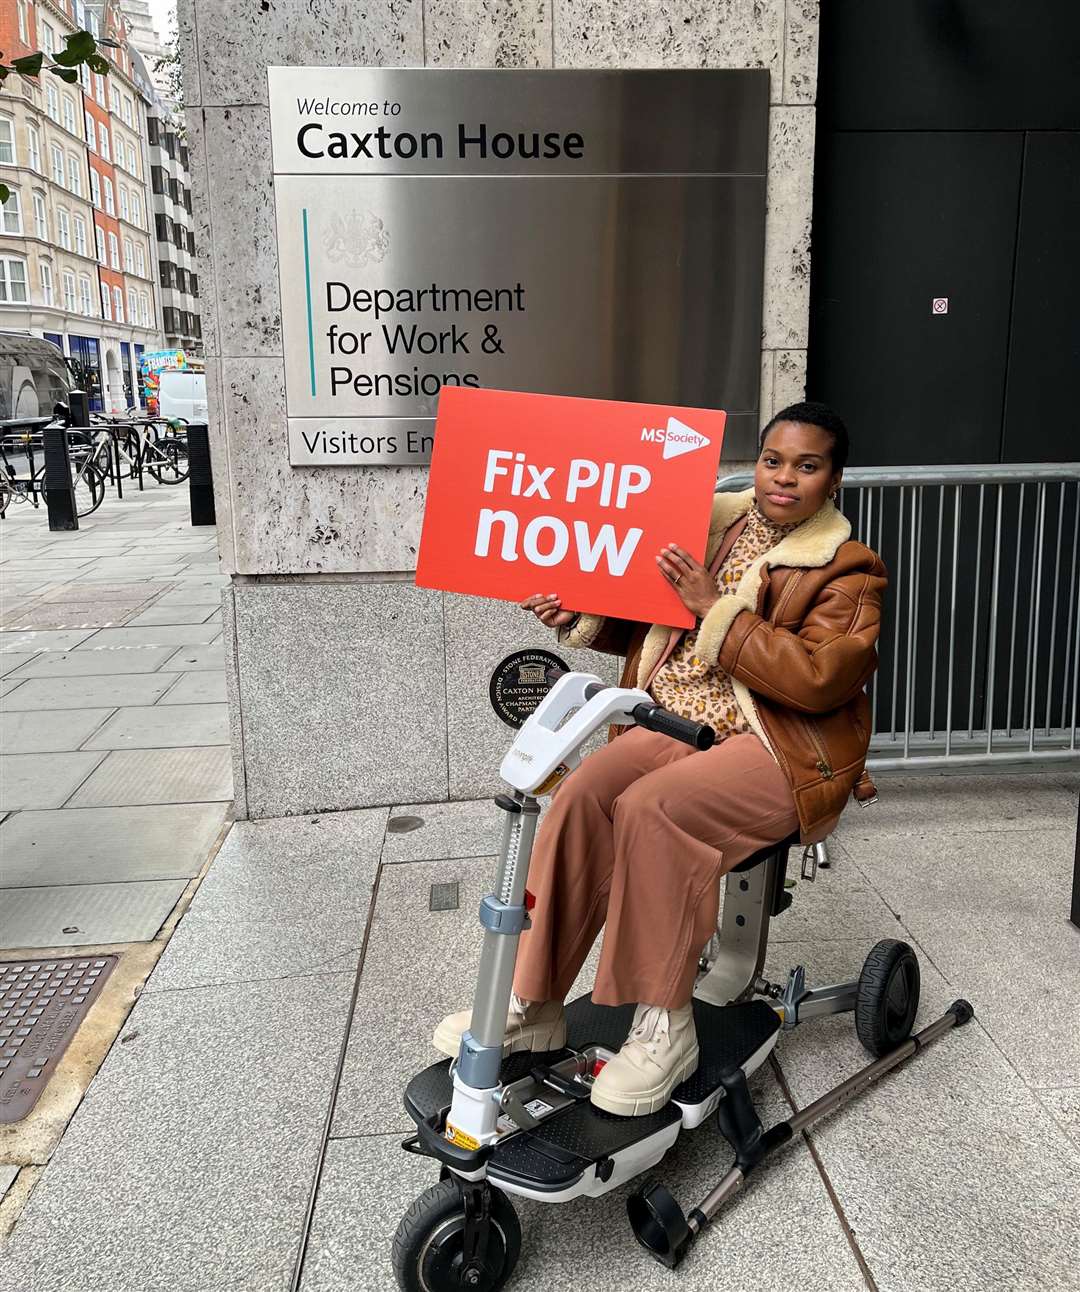 Shereena Aitken-Grey attended a parliamentary event about the devastating impact the Personal Independence Payment (PIP) assessment process is having on people living with multiple sclerosis (MS).